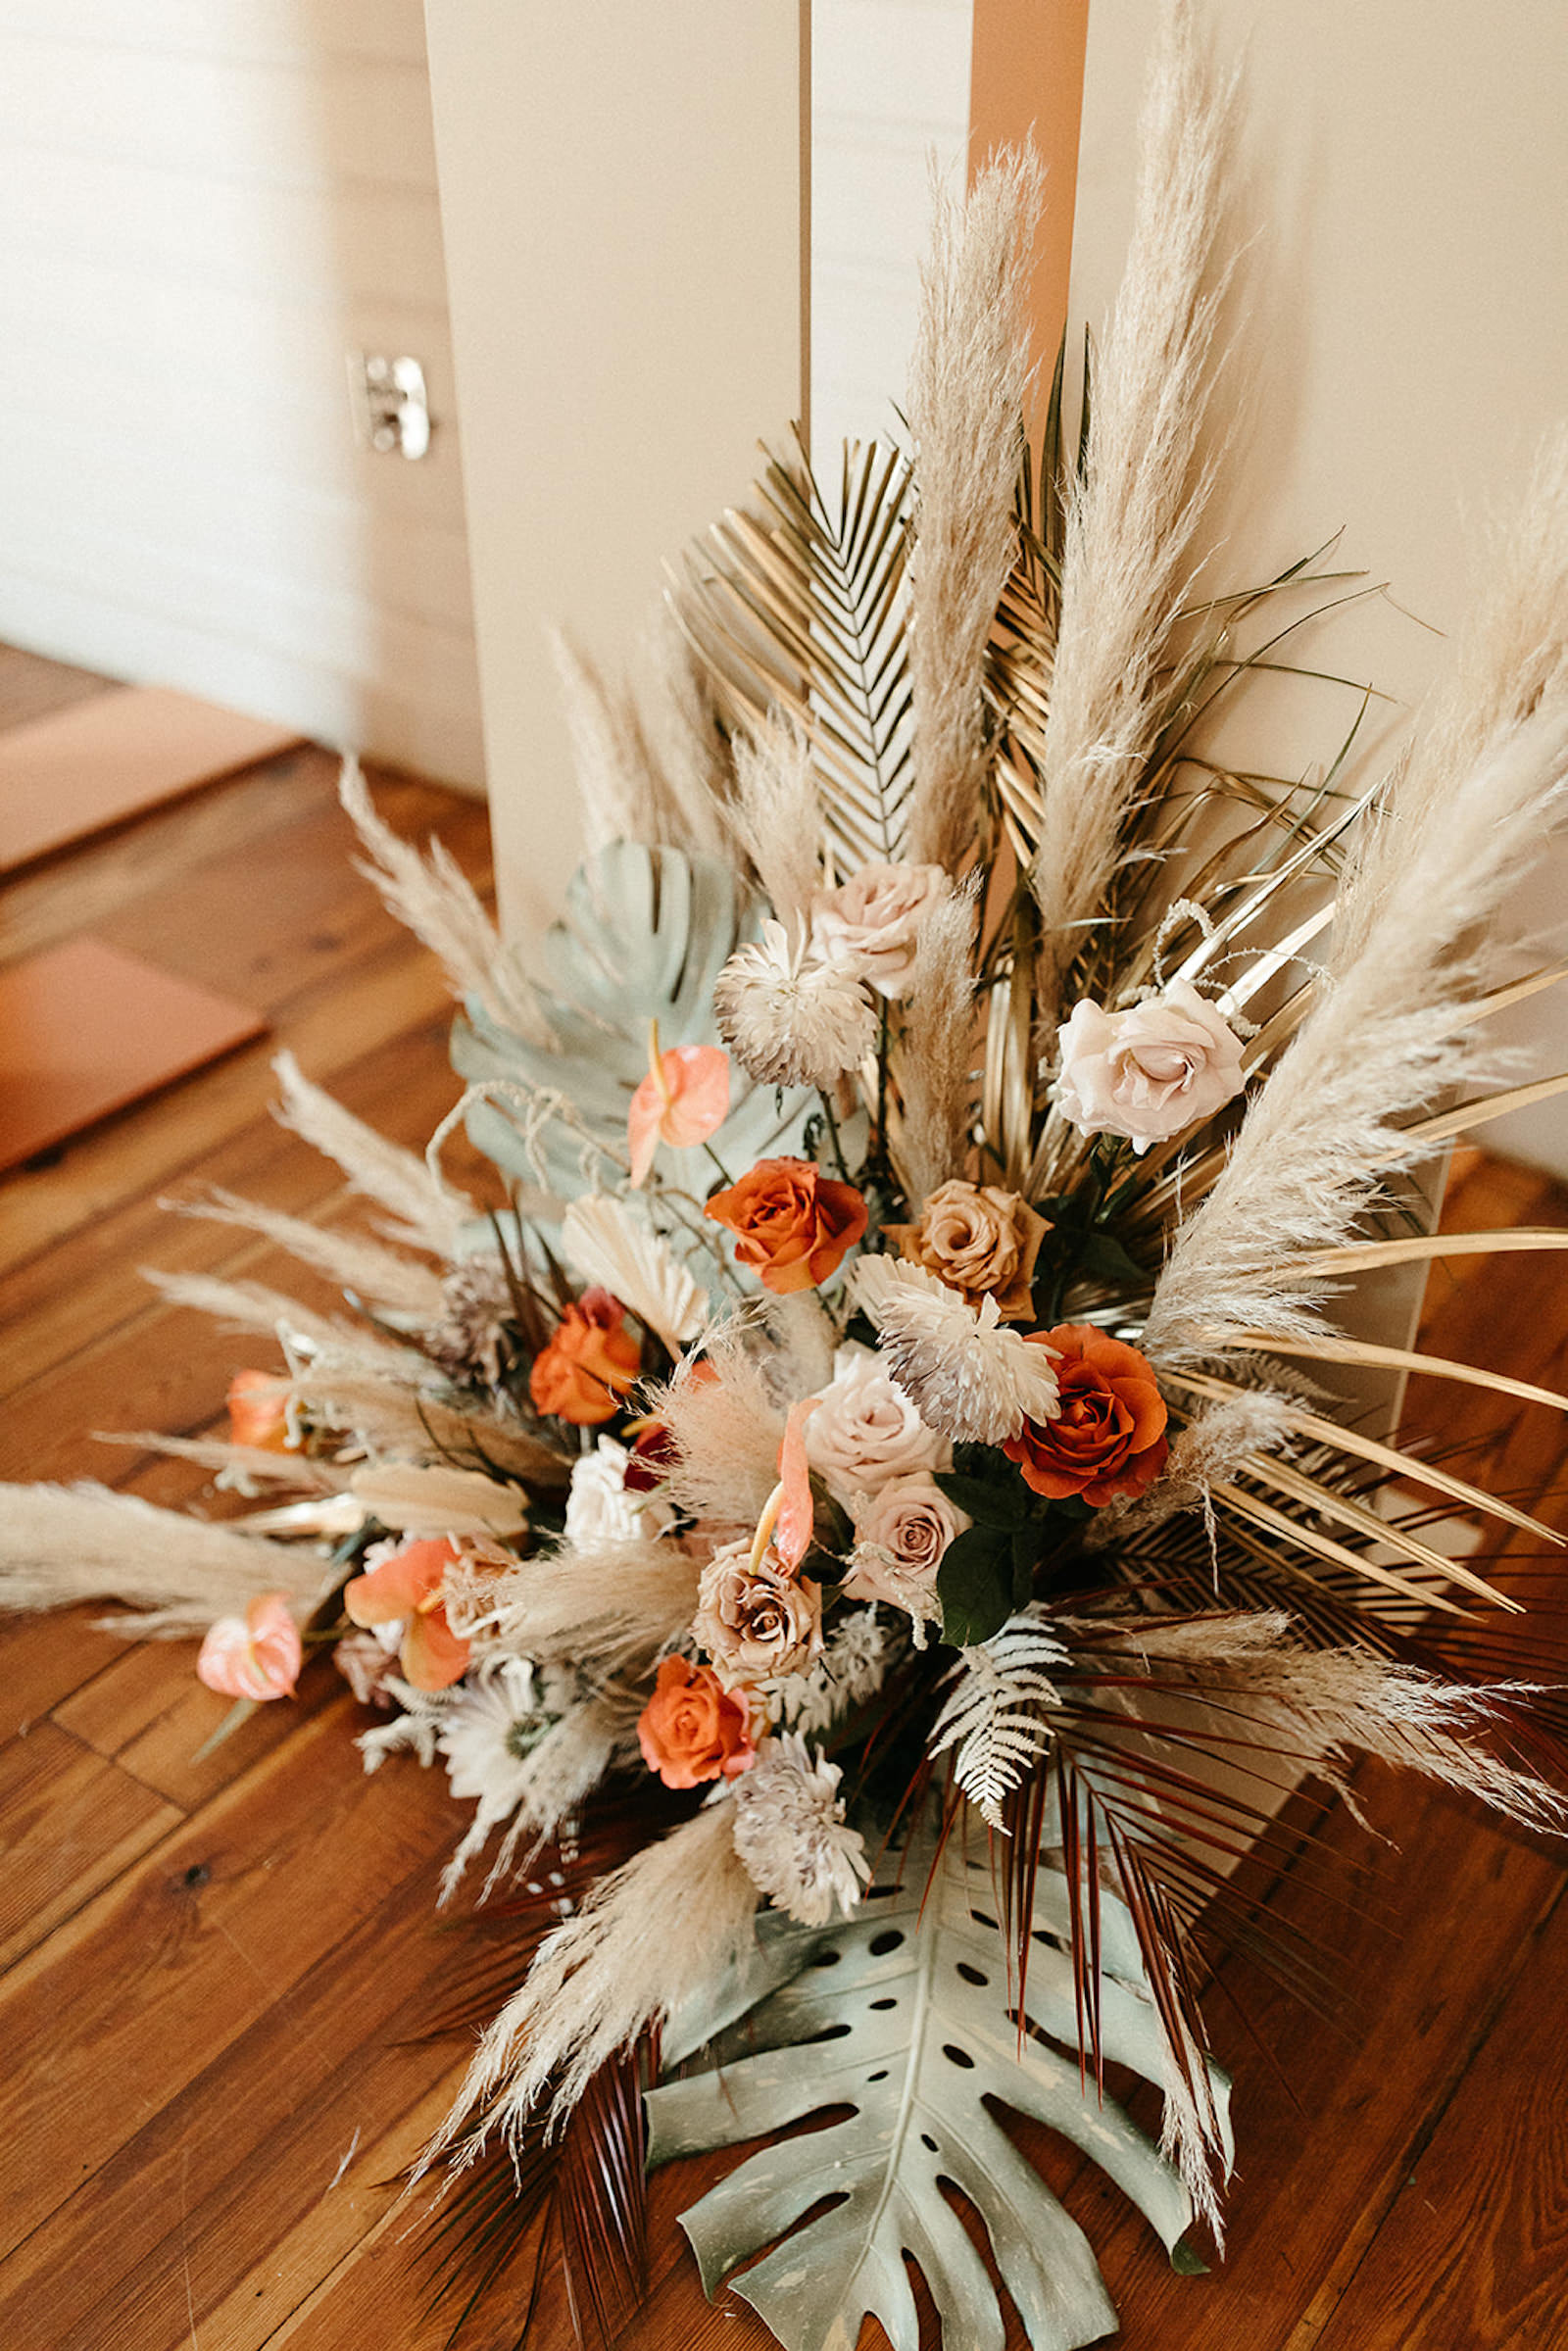 Earthy Neutral Boho Modern Chic Wedding Ceremony Decor, Lush Floral Bouquet, Pampas Grass, Dried Leaves, Monstera Leaves, Terracottaa and Mauve Roses | Tampa Bay Wedding Florist Save the Date Florida